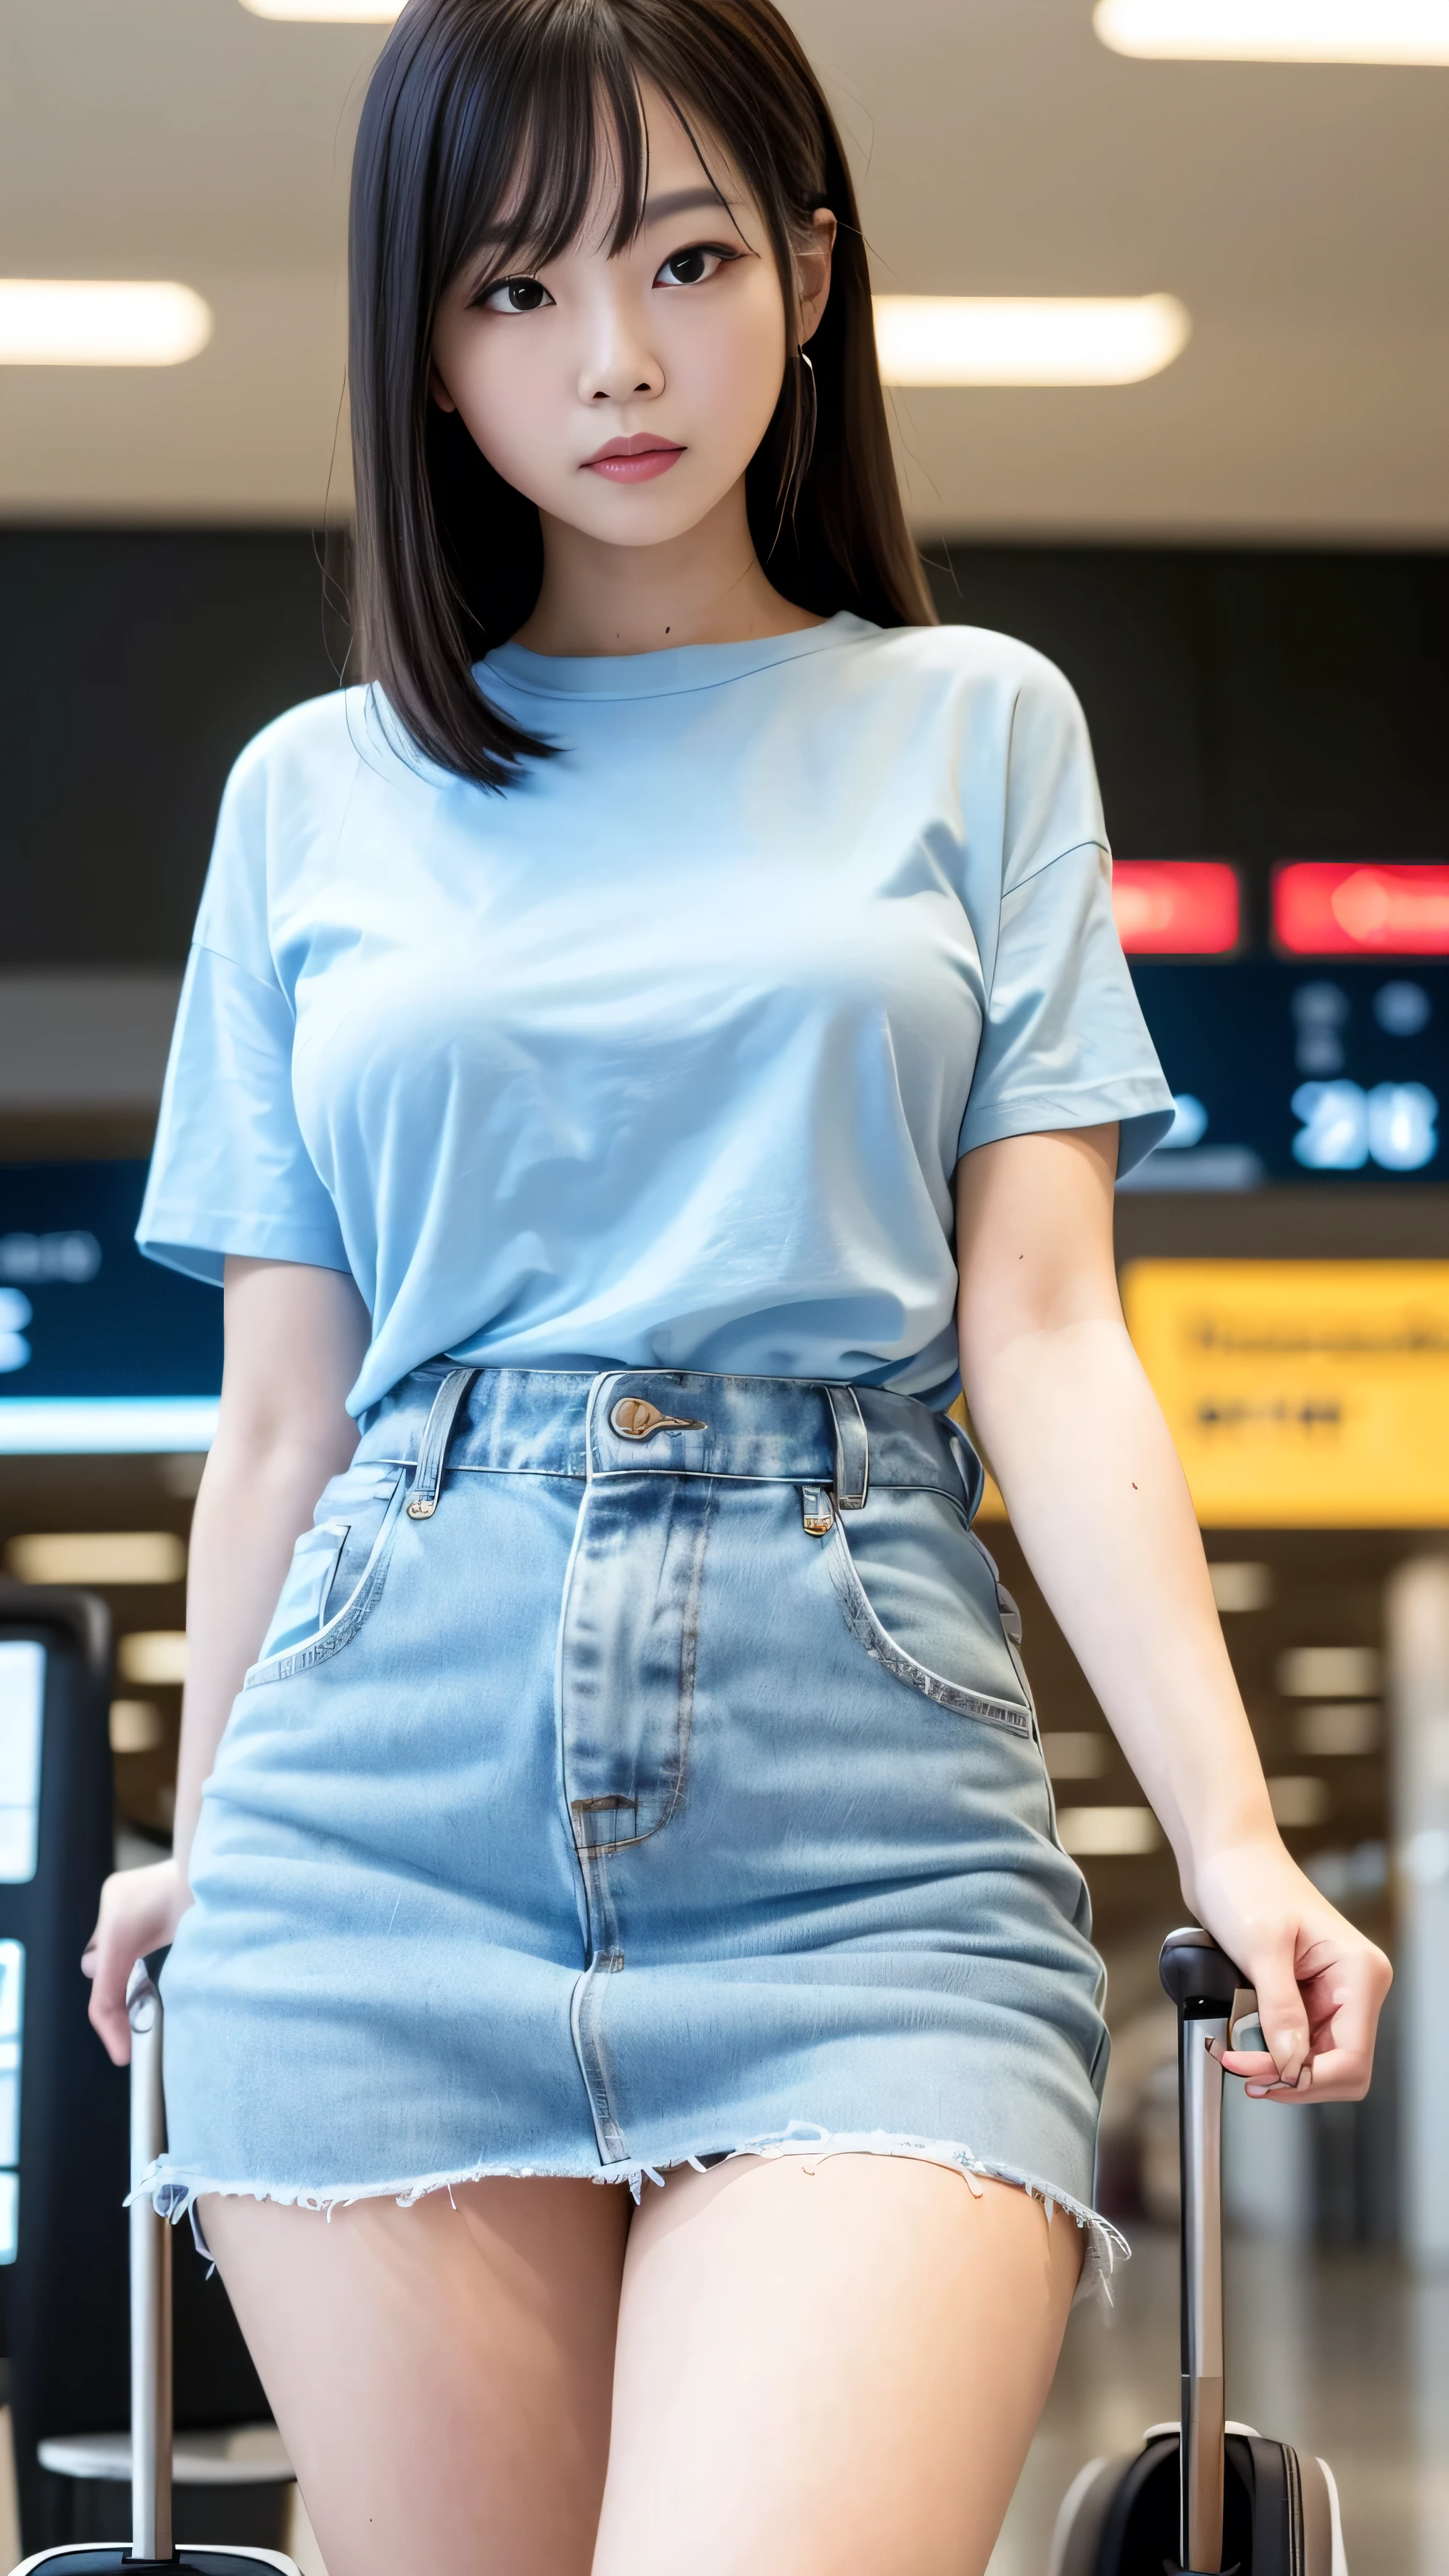 Realistic, ultra-high definition (UHD), 16k, masterpiece: 1.2, photo-realistic: 1.37, a Korean female is captured in an eye-level shot as she walks through the airport terminal. Her crossed bangs frame a slightly yet captivating smile. Wearing a casual white t-shirt, her outfit radiates comfort and effortless style. The blurry backdrop of the airport creates a sense of motion and a POV perspective, immersing the viewer in the scene. Her eyes, with their striking contrast and long lashes, catch the viewer's attention. High-resolution details accentuate her facial features, showcasing her